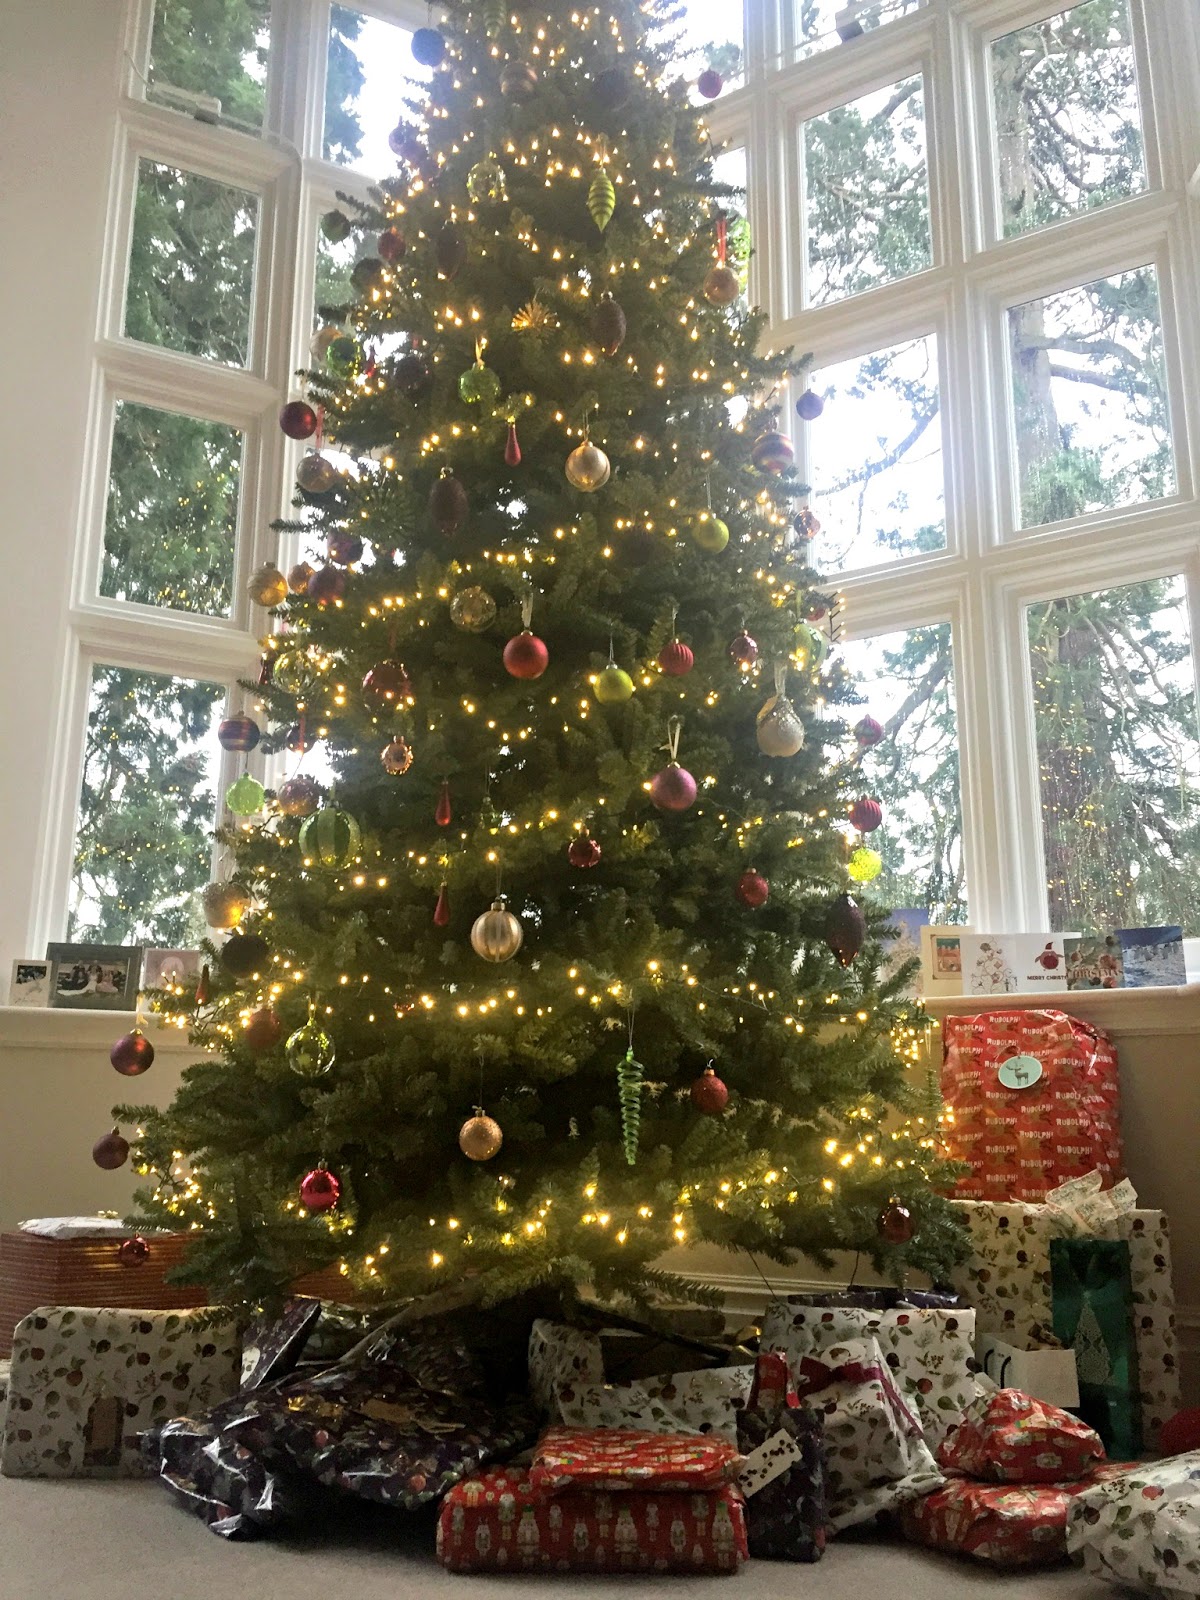 Christmas tree with presents underneath